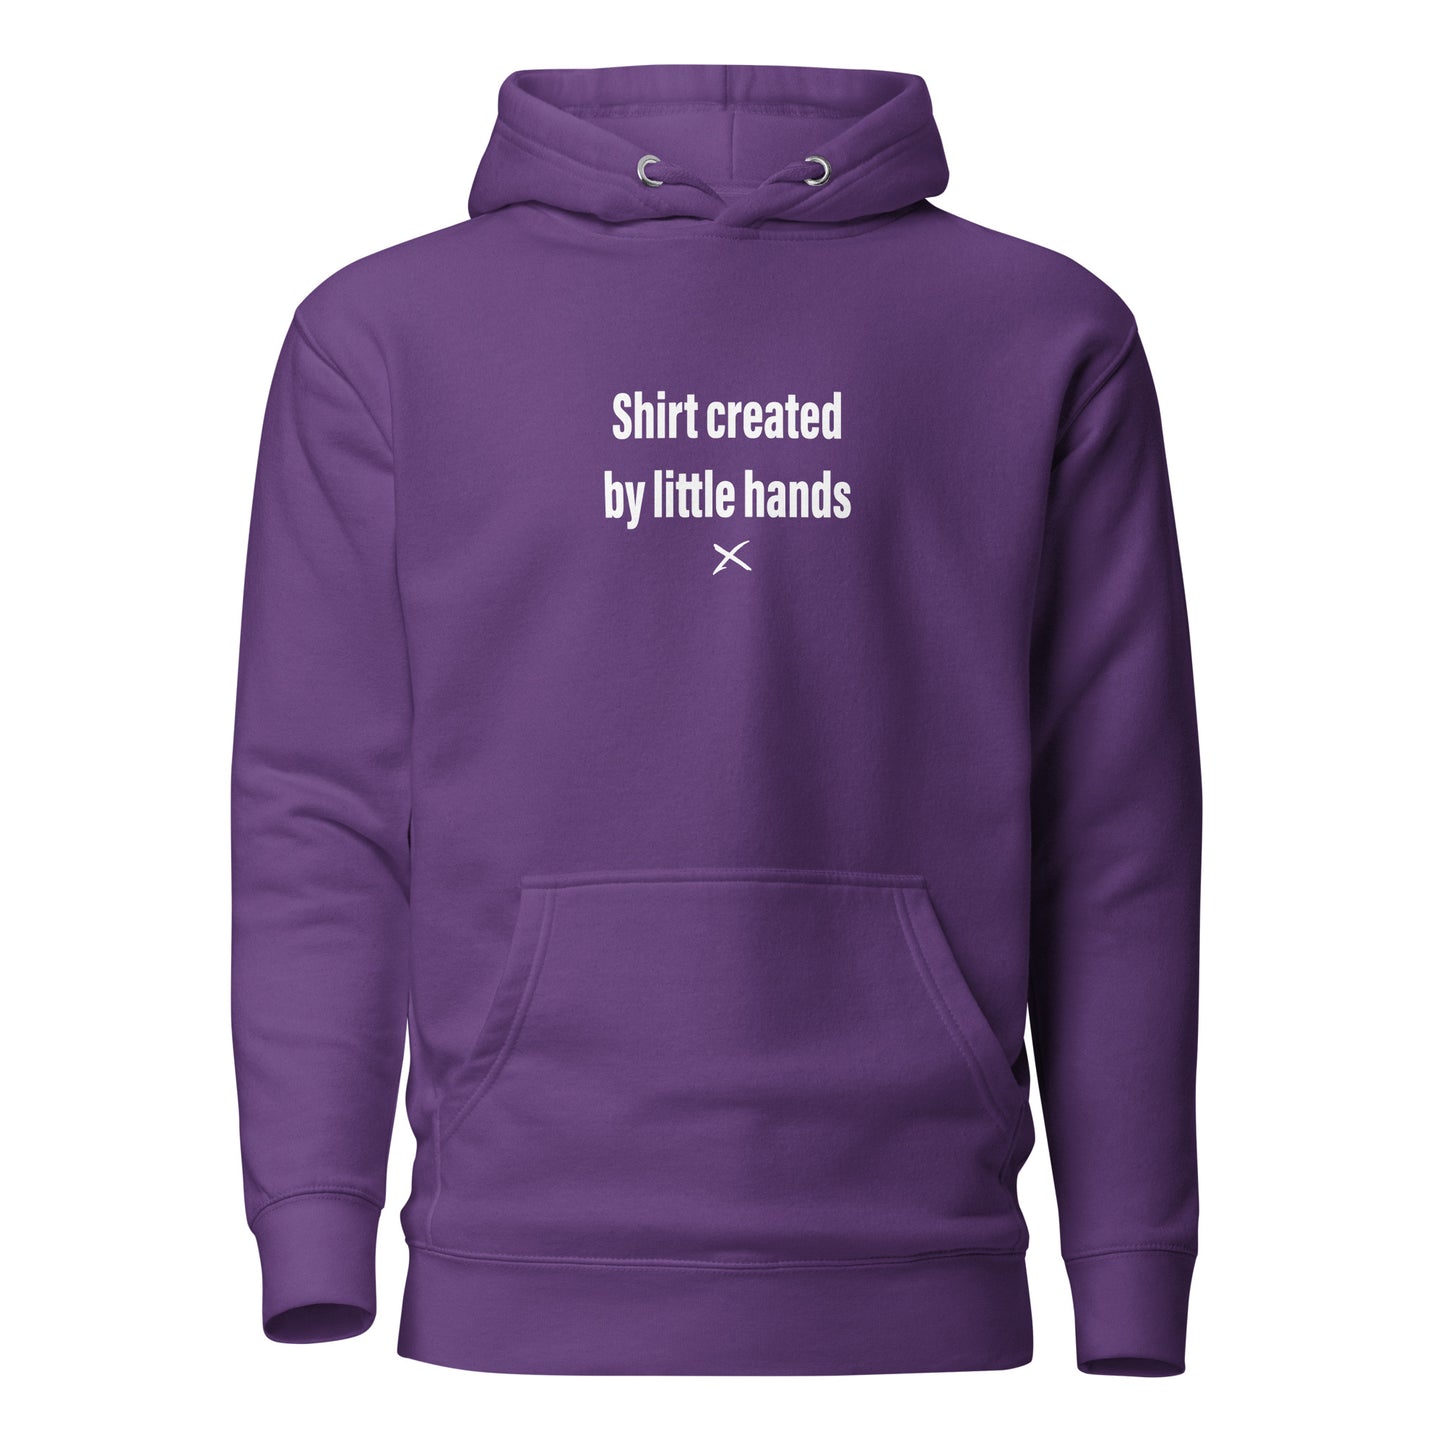 Shirt created by little hands - Hoodie